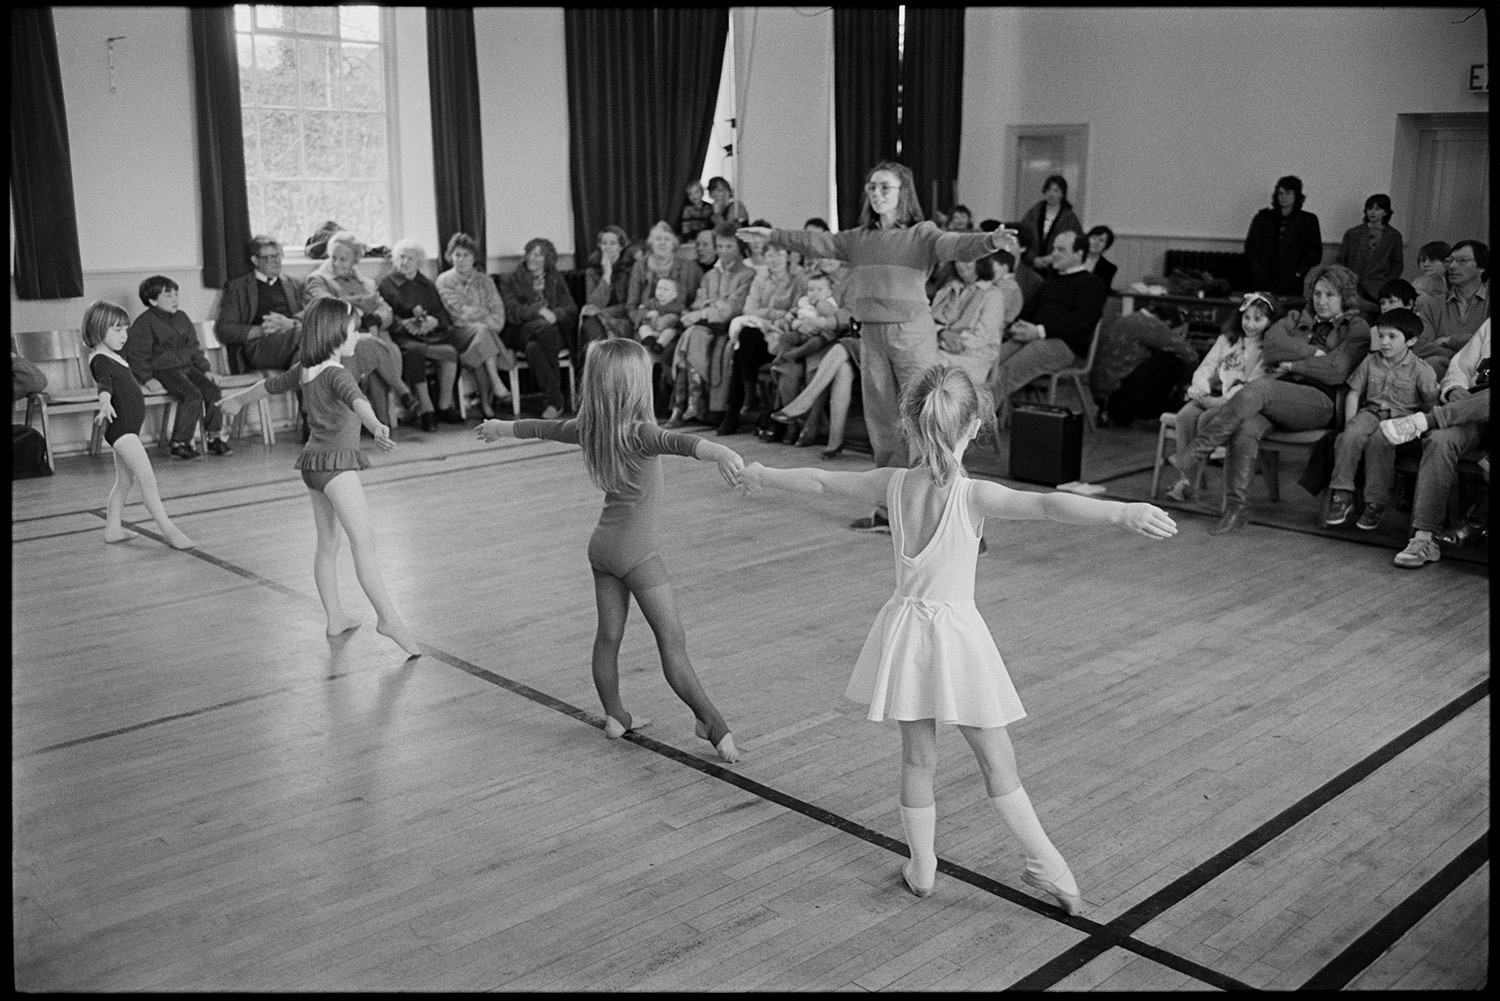 Dance class, children dancing performance in front of parents. Sally Barber's dancing.
[Four girls dancing in Winkleigh Village Hall in a performance by Sally Barber's dancing class in front of their parents, with Sally Barber standing in front of the girls directing them.]